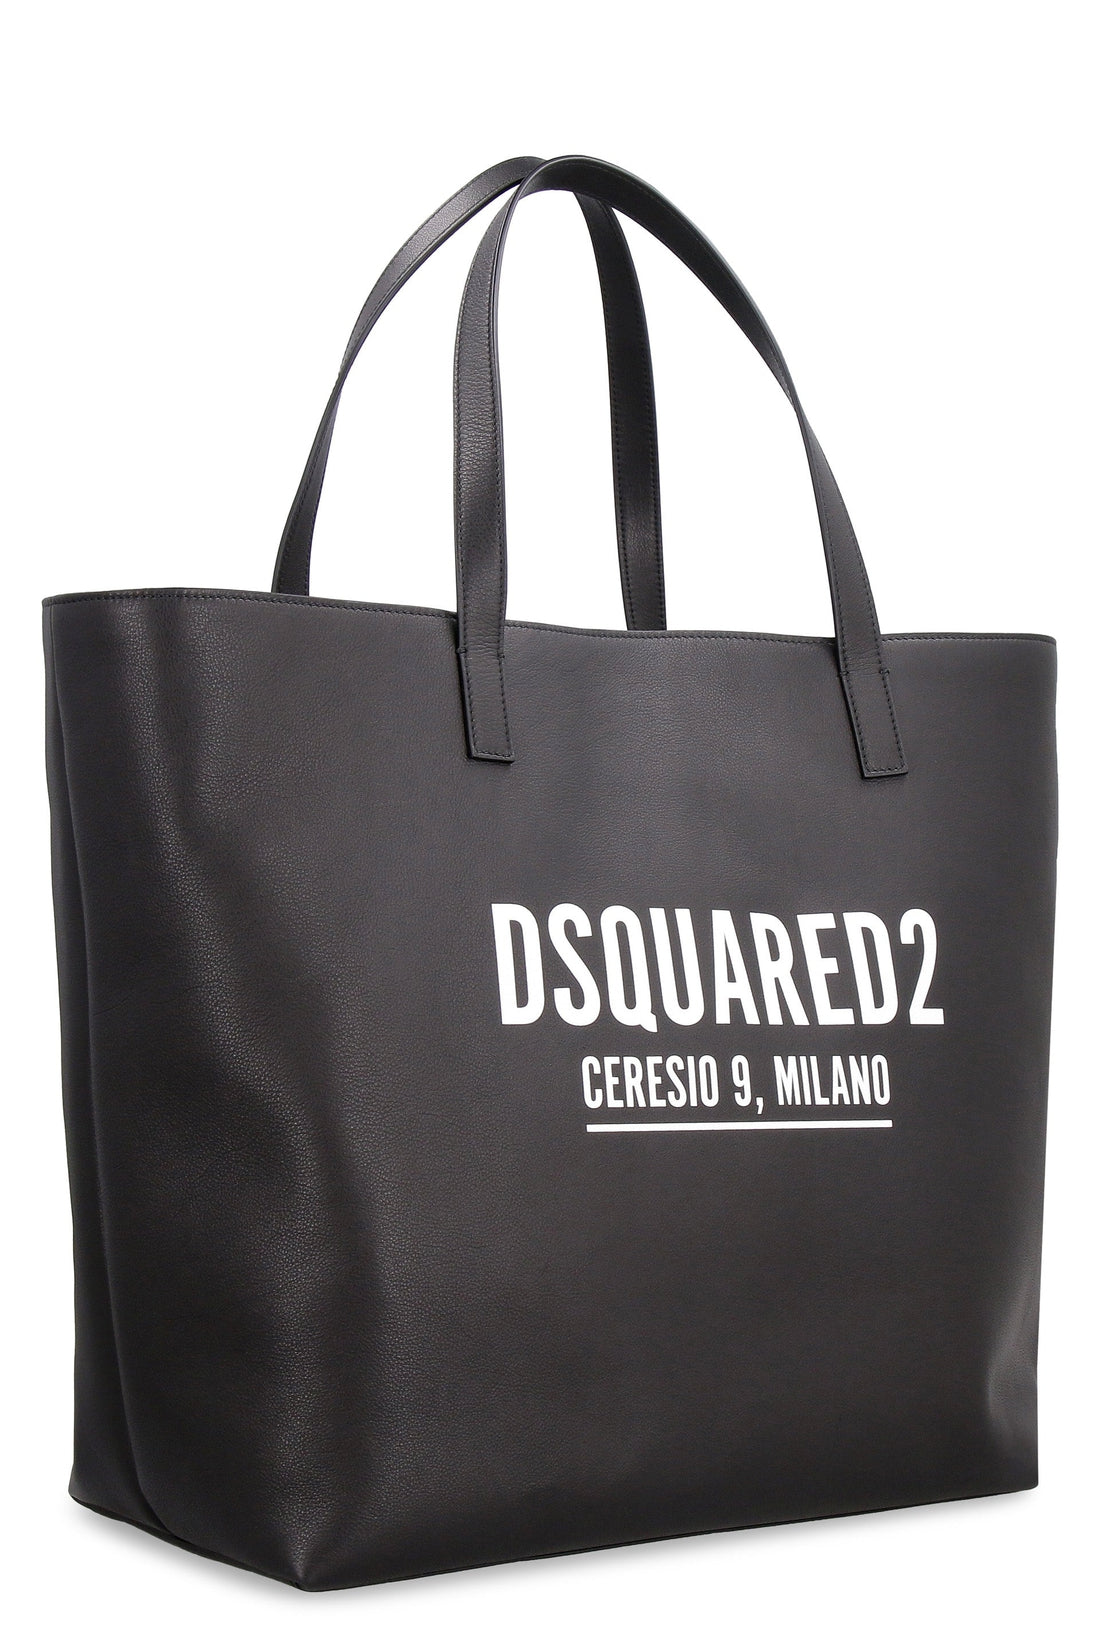 Dsquared2-OUTLET-SALE-Leather tote-ARCHIVIST